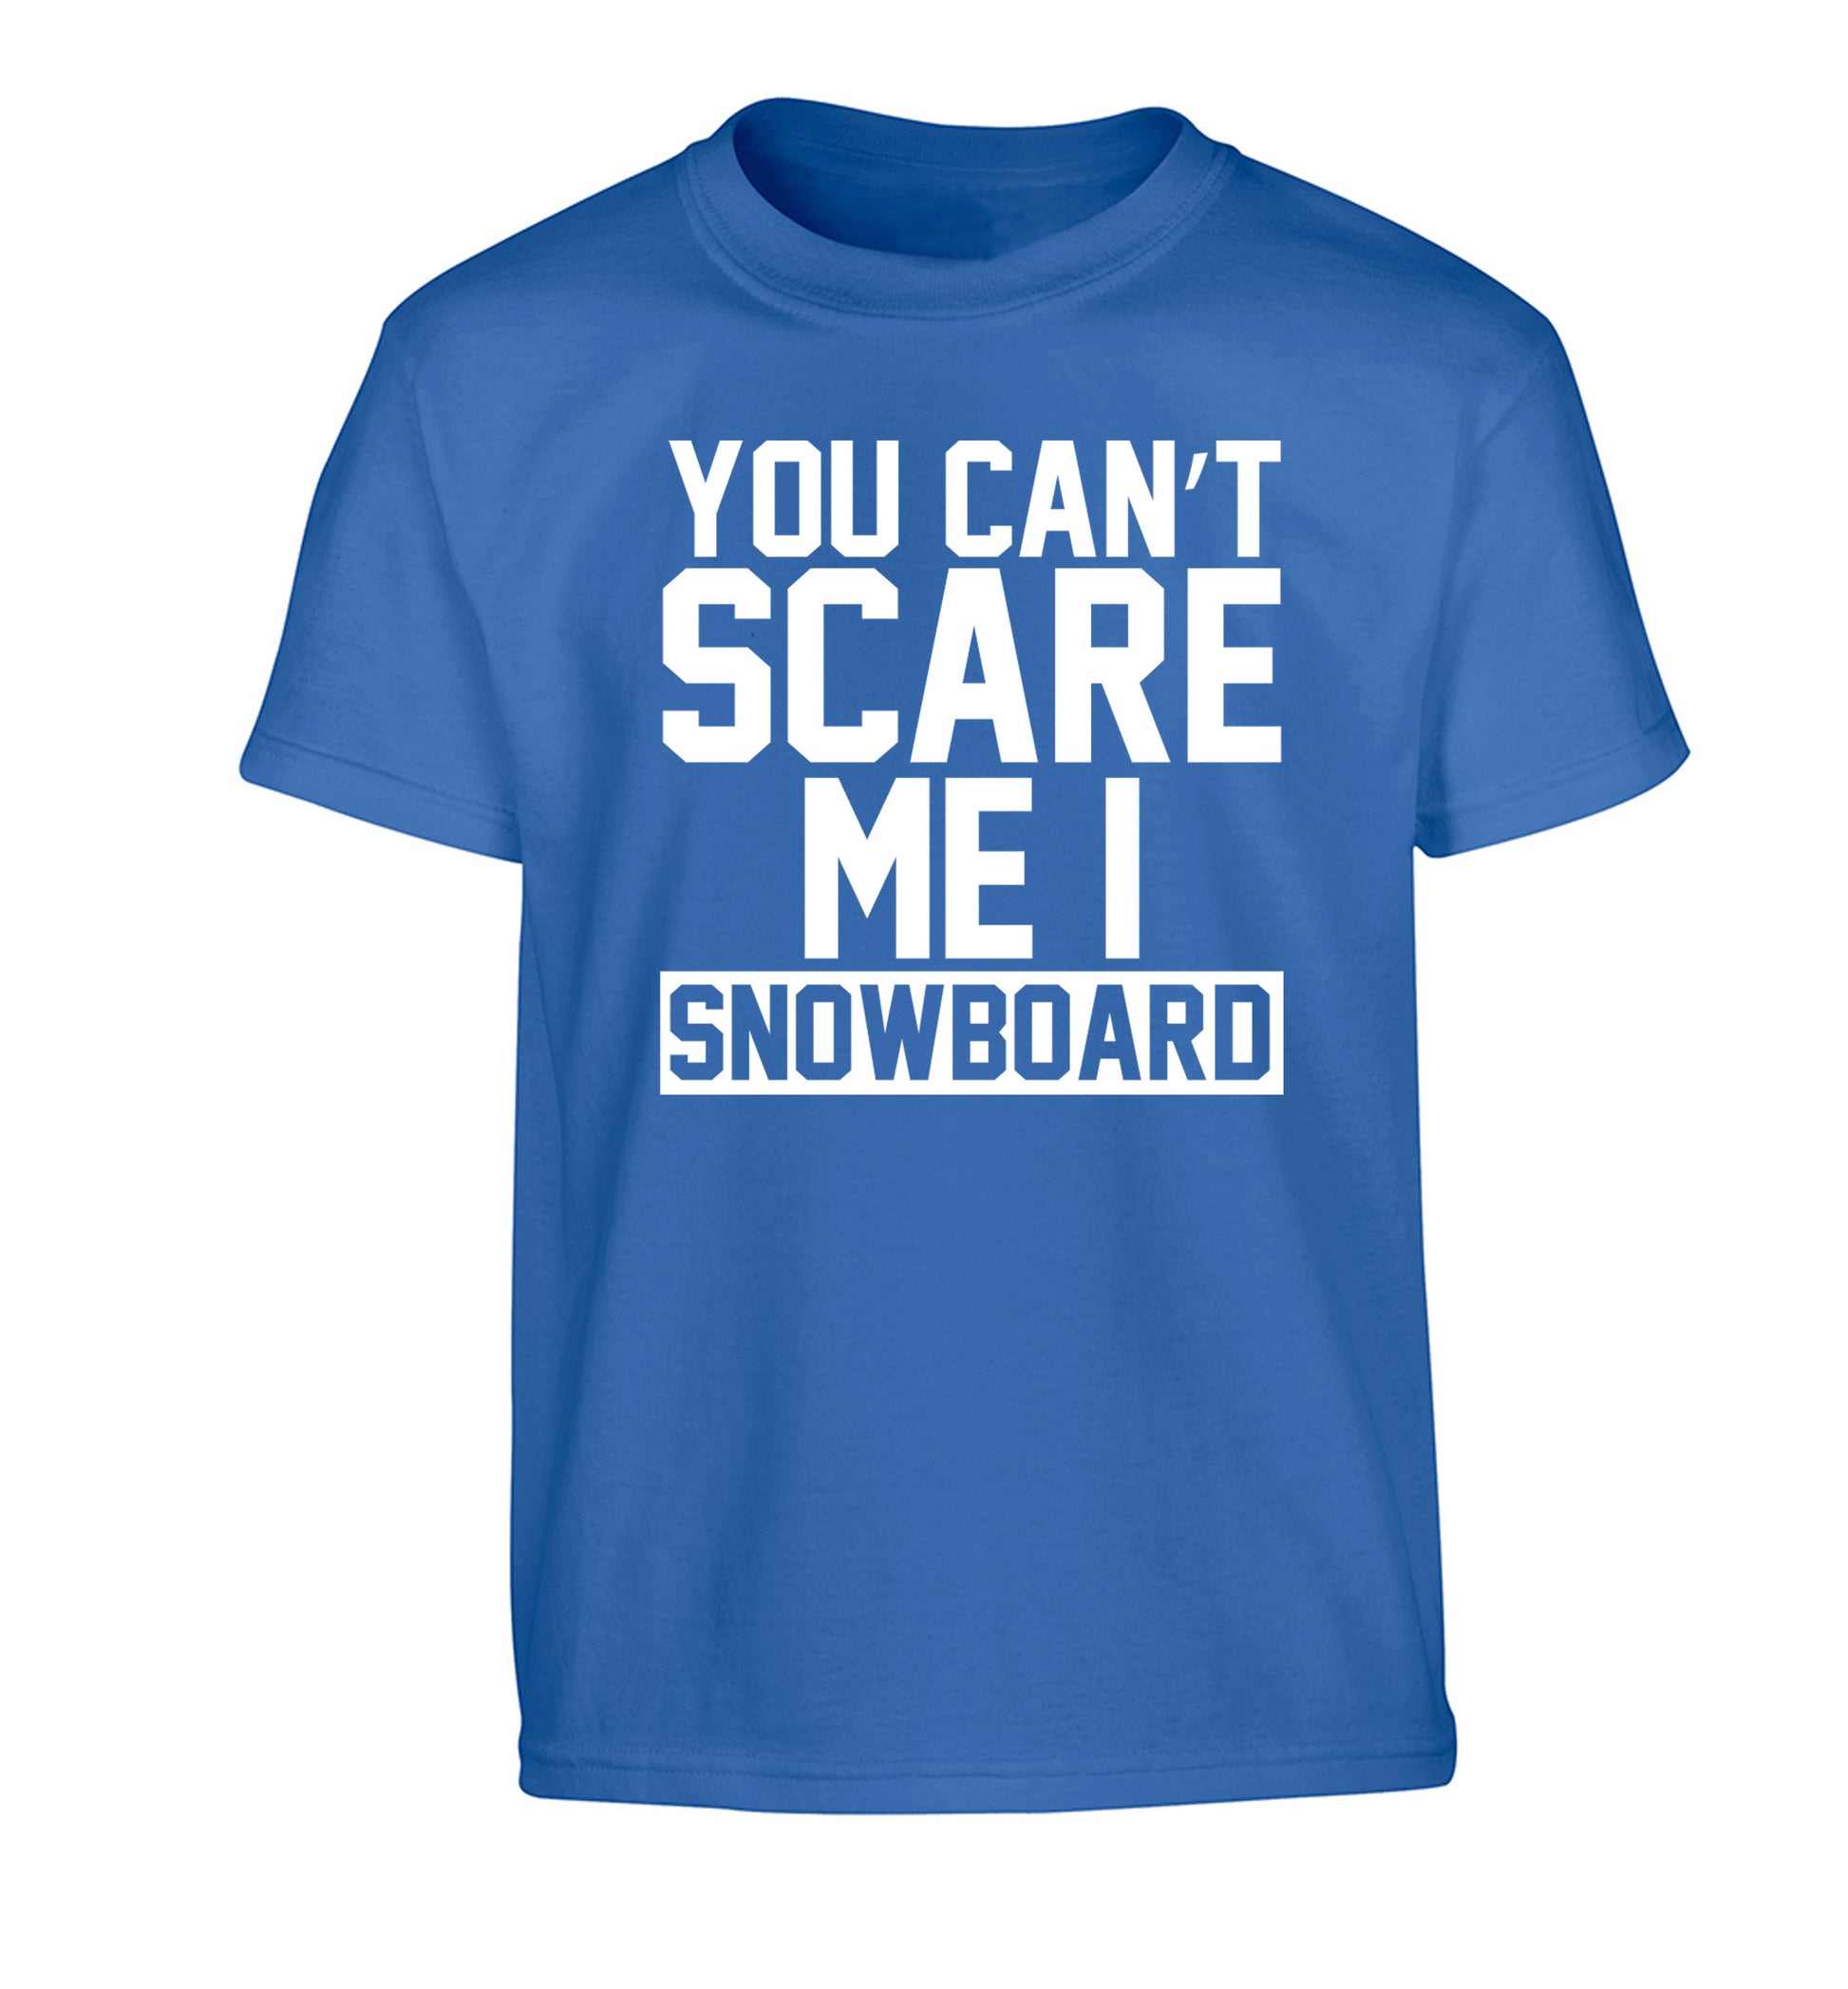 You can't scare me I snowboard Children's blue Tshirt 12-14 Years